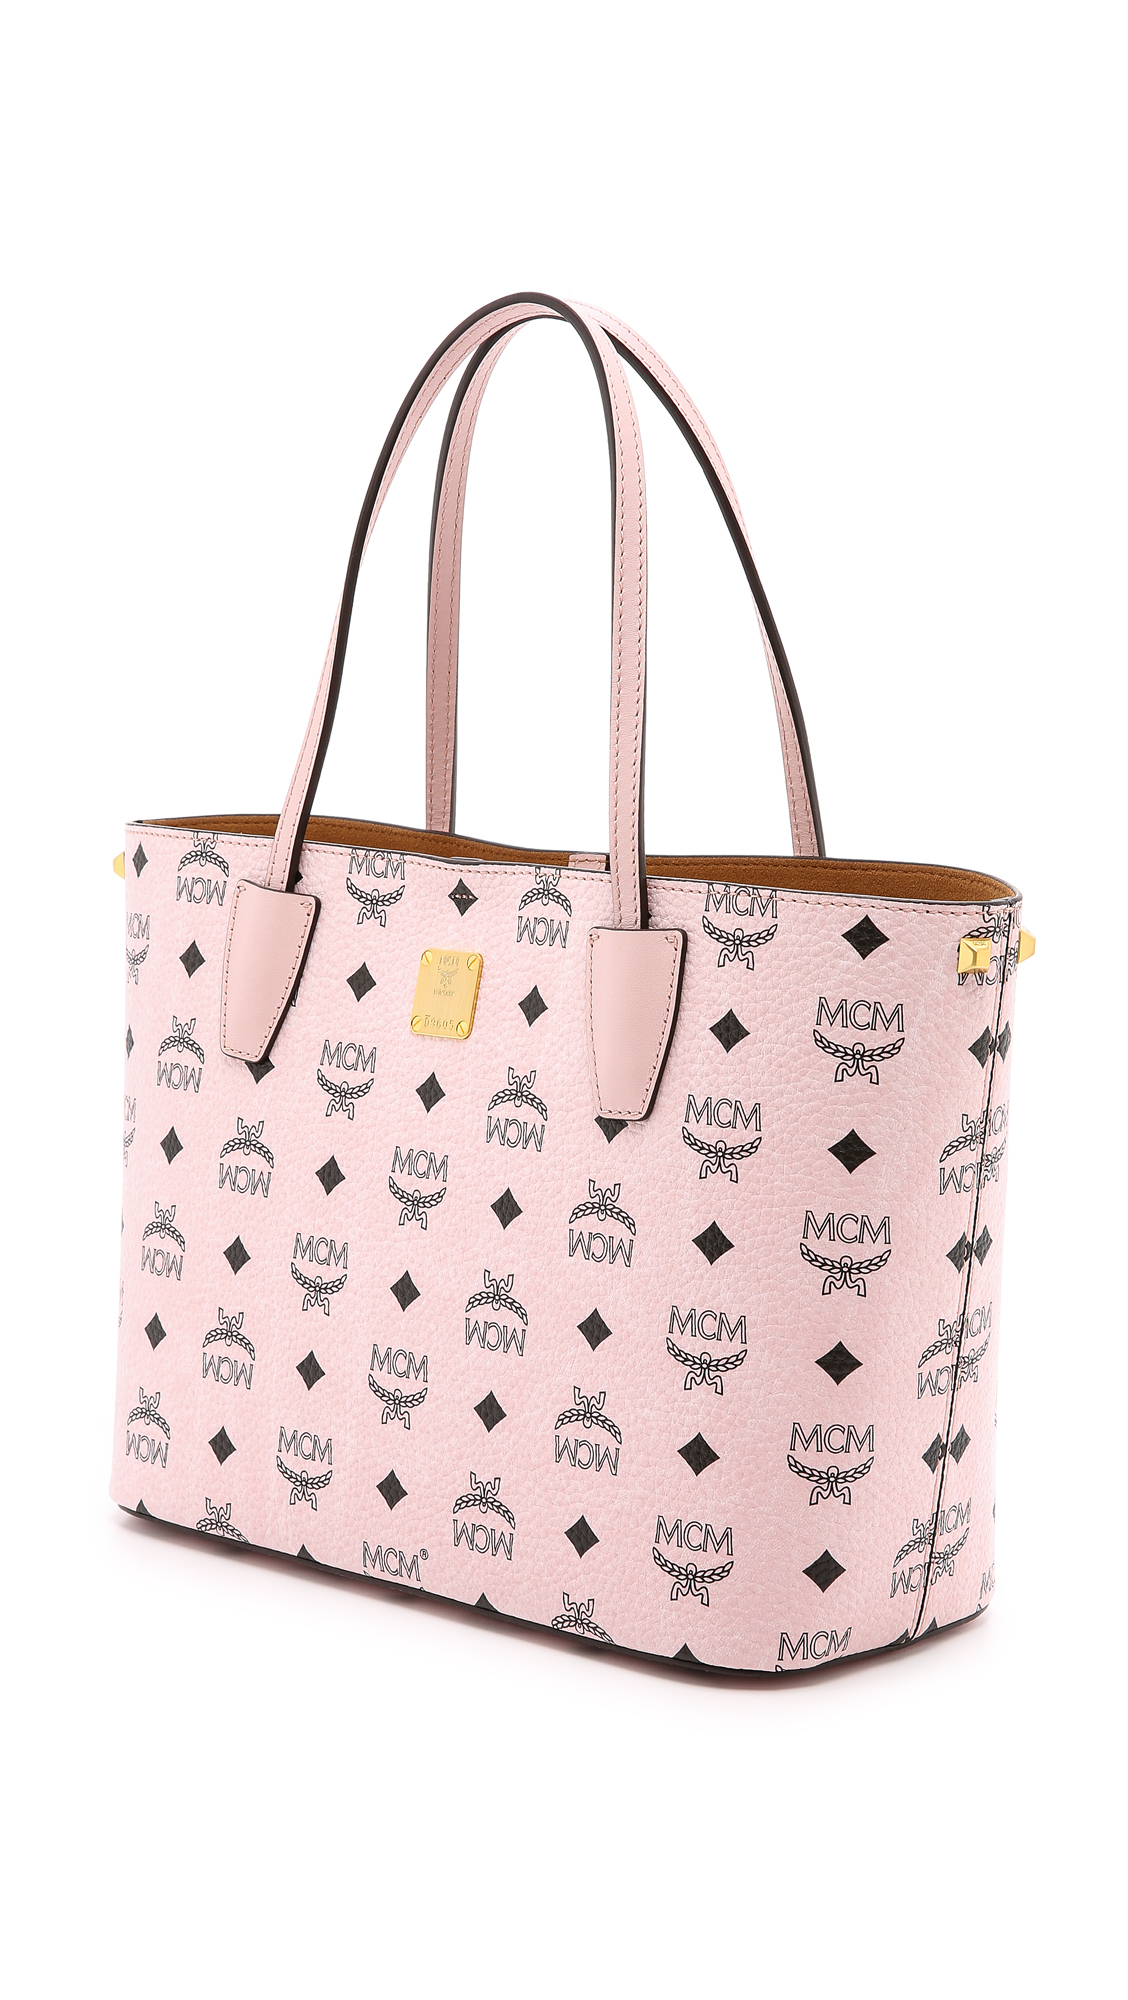 Lyst - MCM Small Shopper Tote - Chalk Pink in Pink